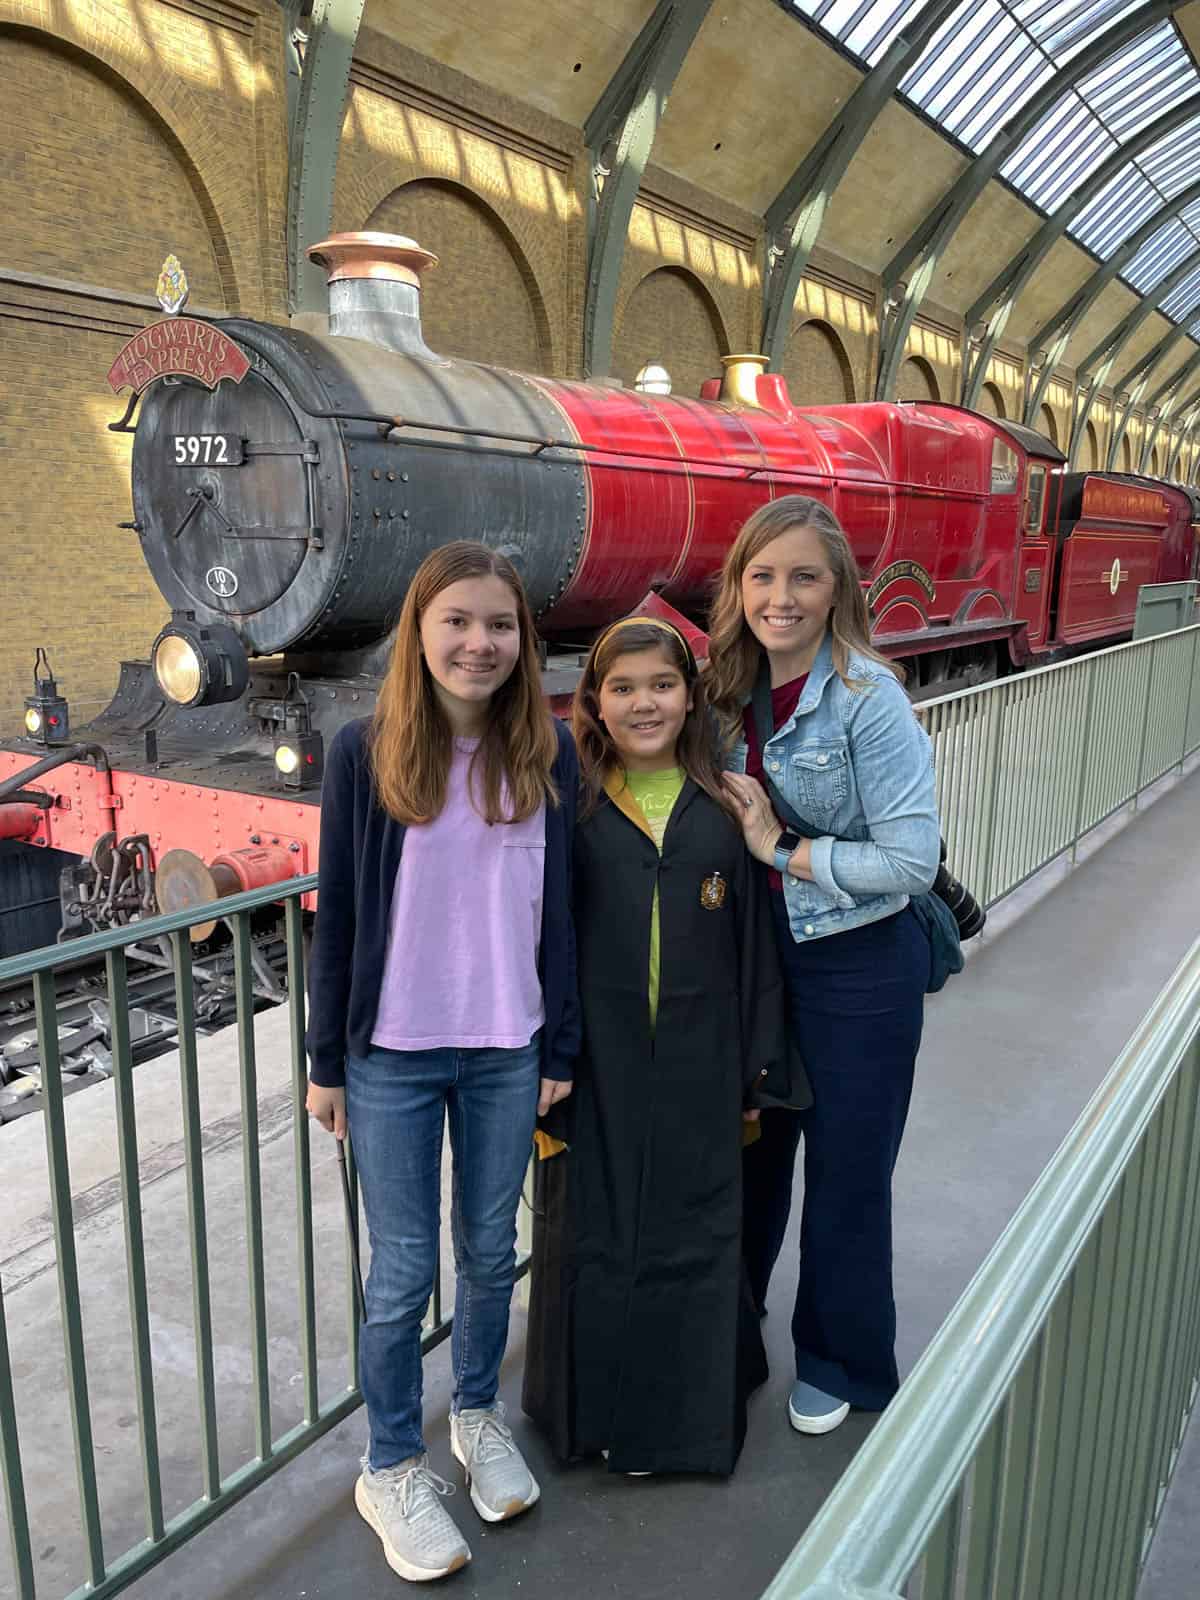 An image of a mom and two daughters in front of the Hogwarts Express on platform 9 and ¾ at King's Cross Station.